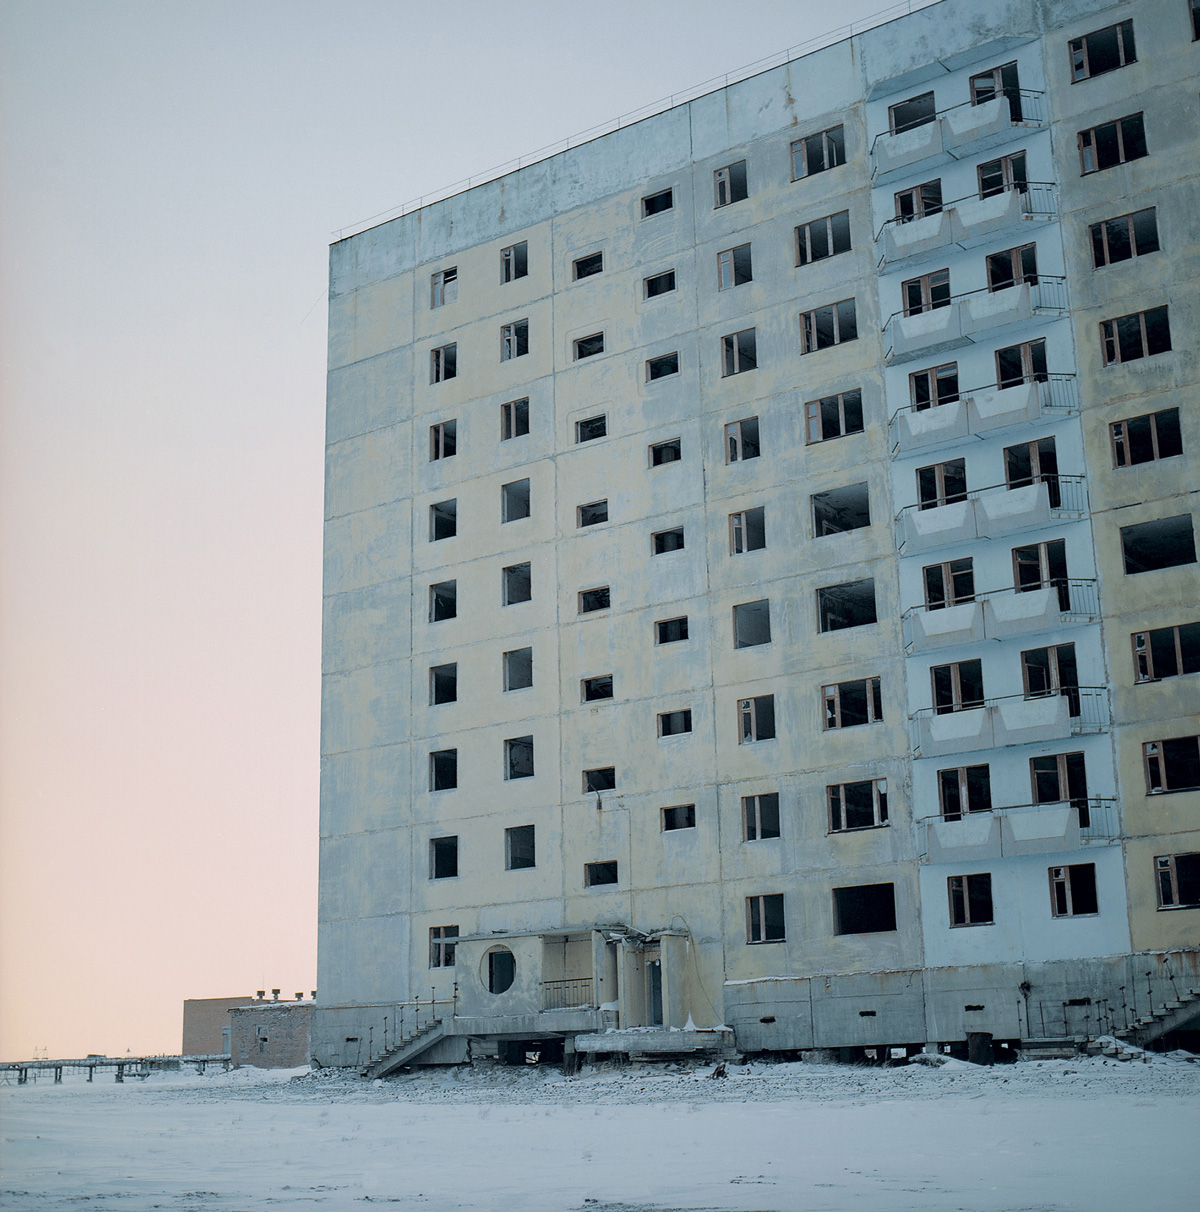 A photograph of an apartment building in Norilsk, Northern Siberia.